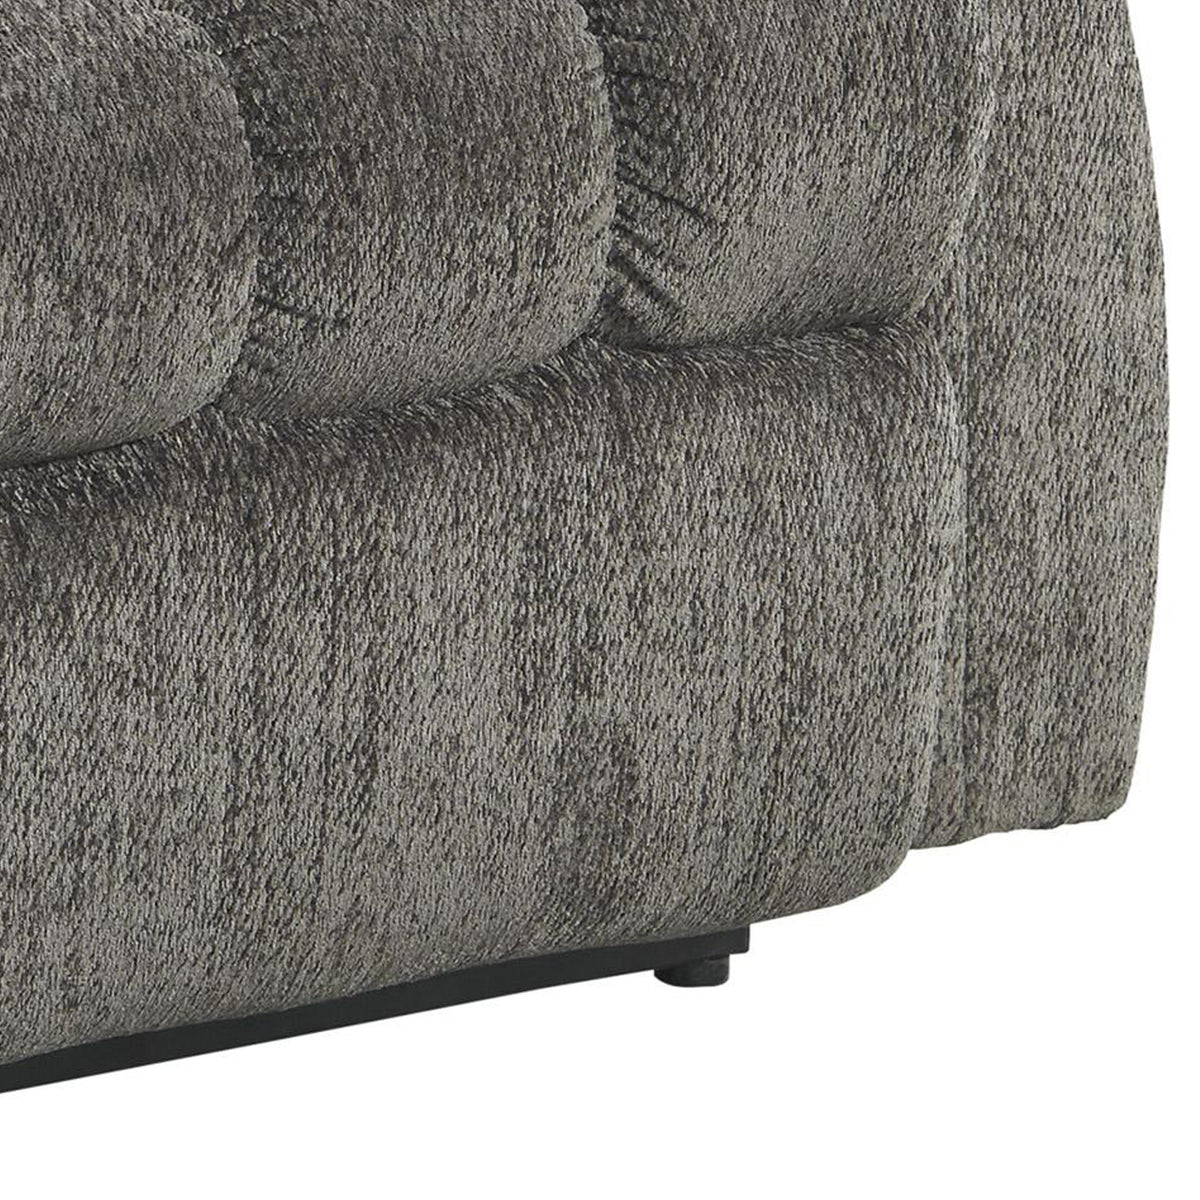 Upholstered Metal Frame Power Lift Recliner with Tufted Seat and Back in Gray - BM209297